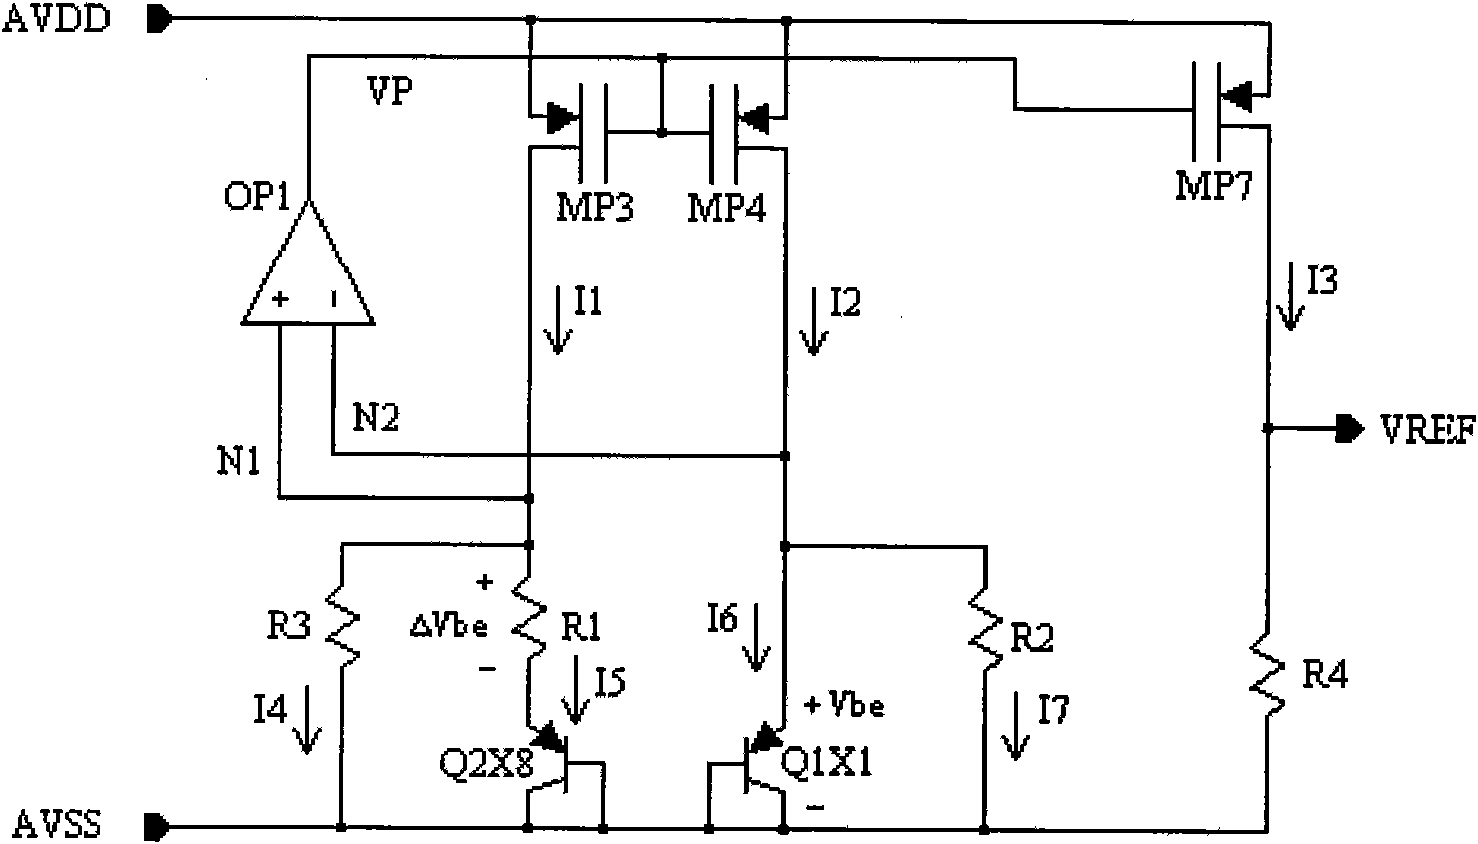 High power supply rejection ratio (PSRR) reference source circuit with adjustable output